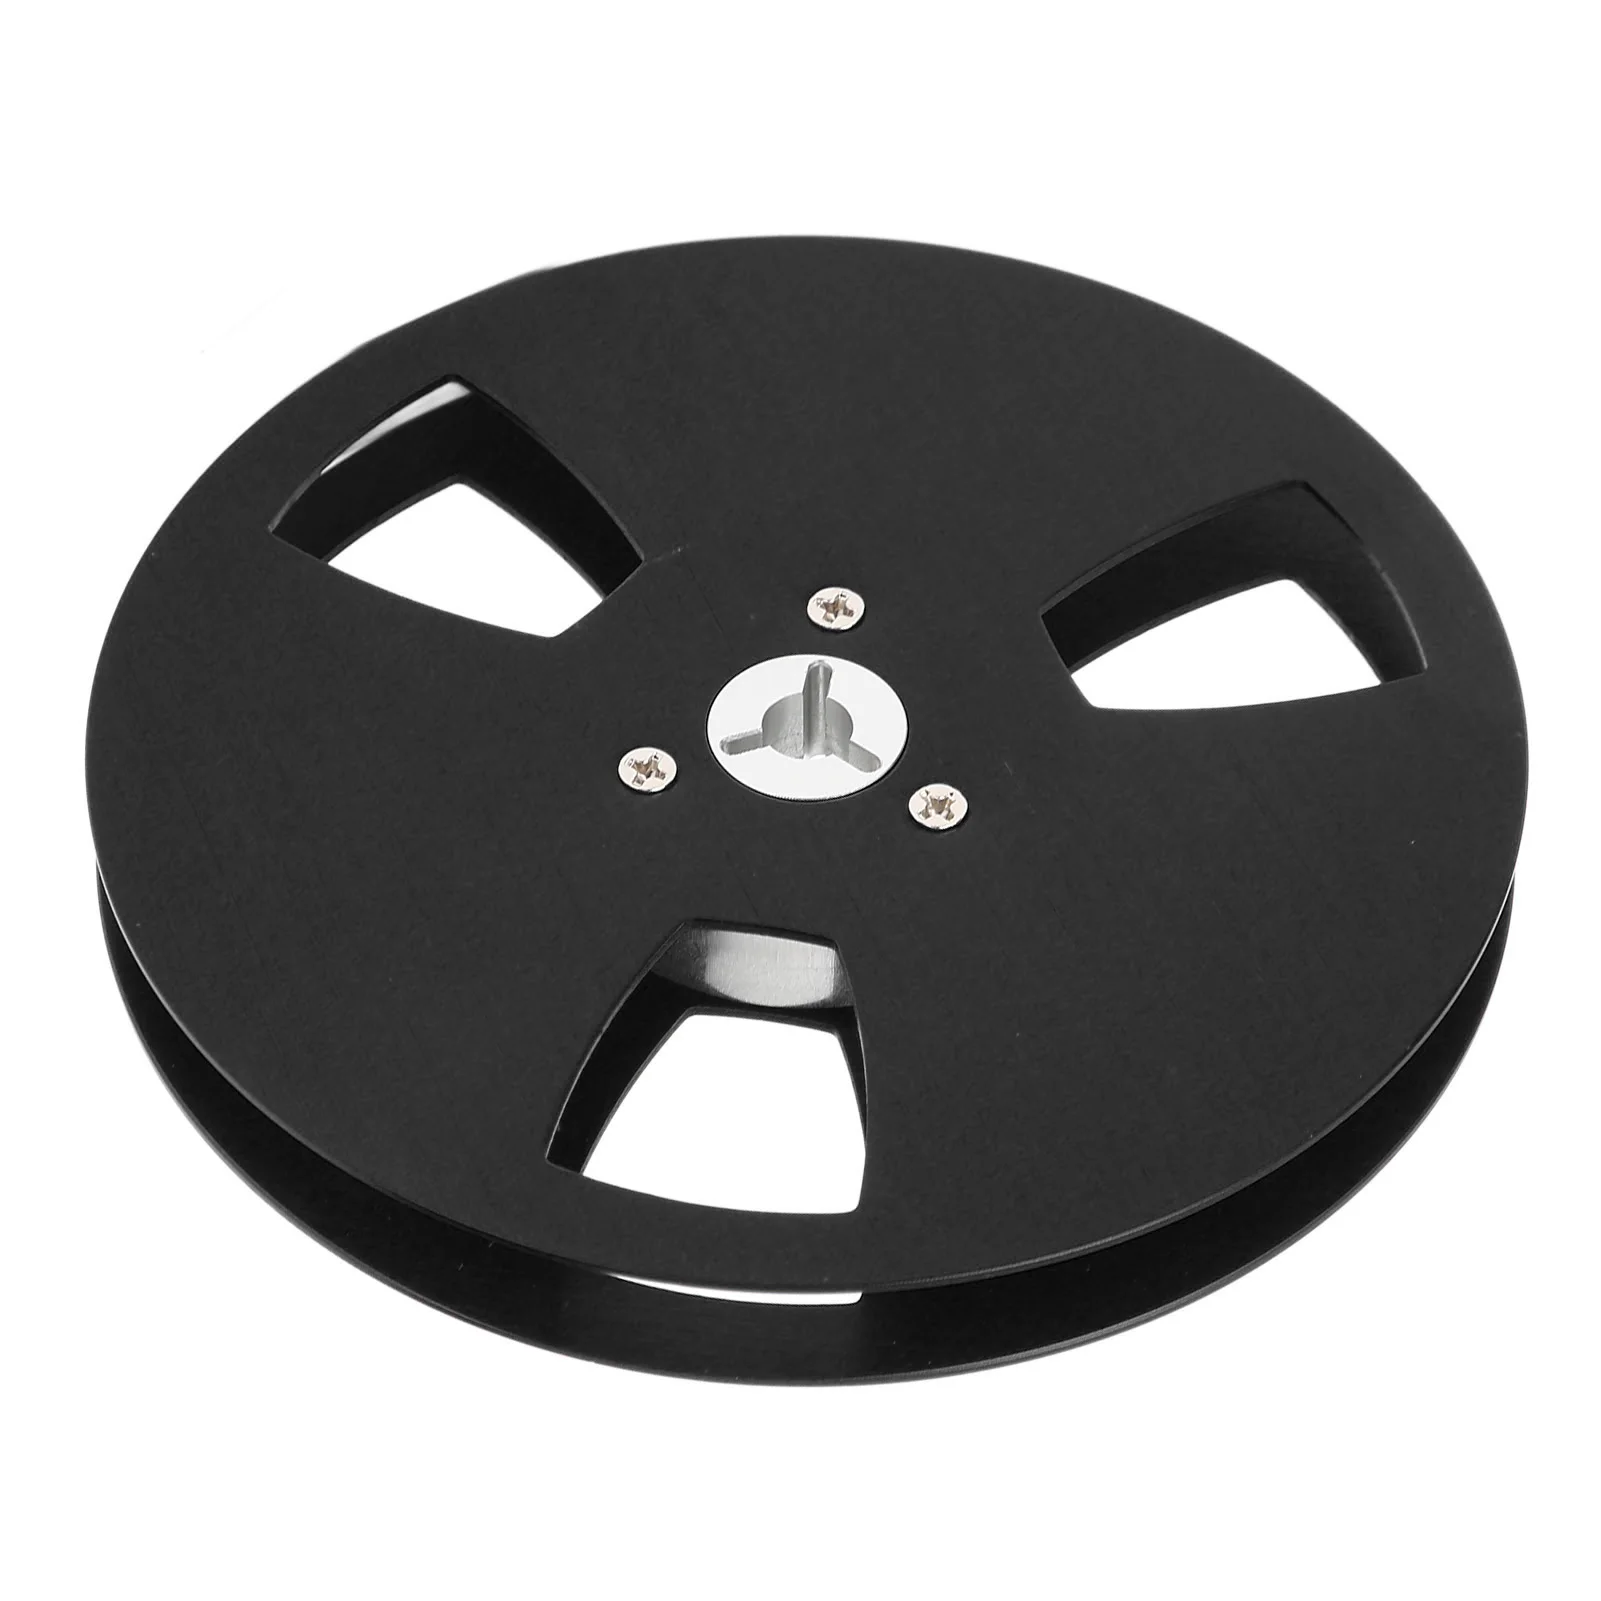 1/4 7 Inch Nab Aluminum Metal Reel, Universal 3 Holes Empty Take Up Reel to  Reel Small Hub, Low Noise, for Fix Your Tape Recorder or Replace It with a